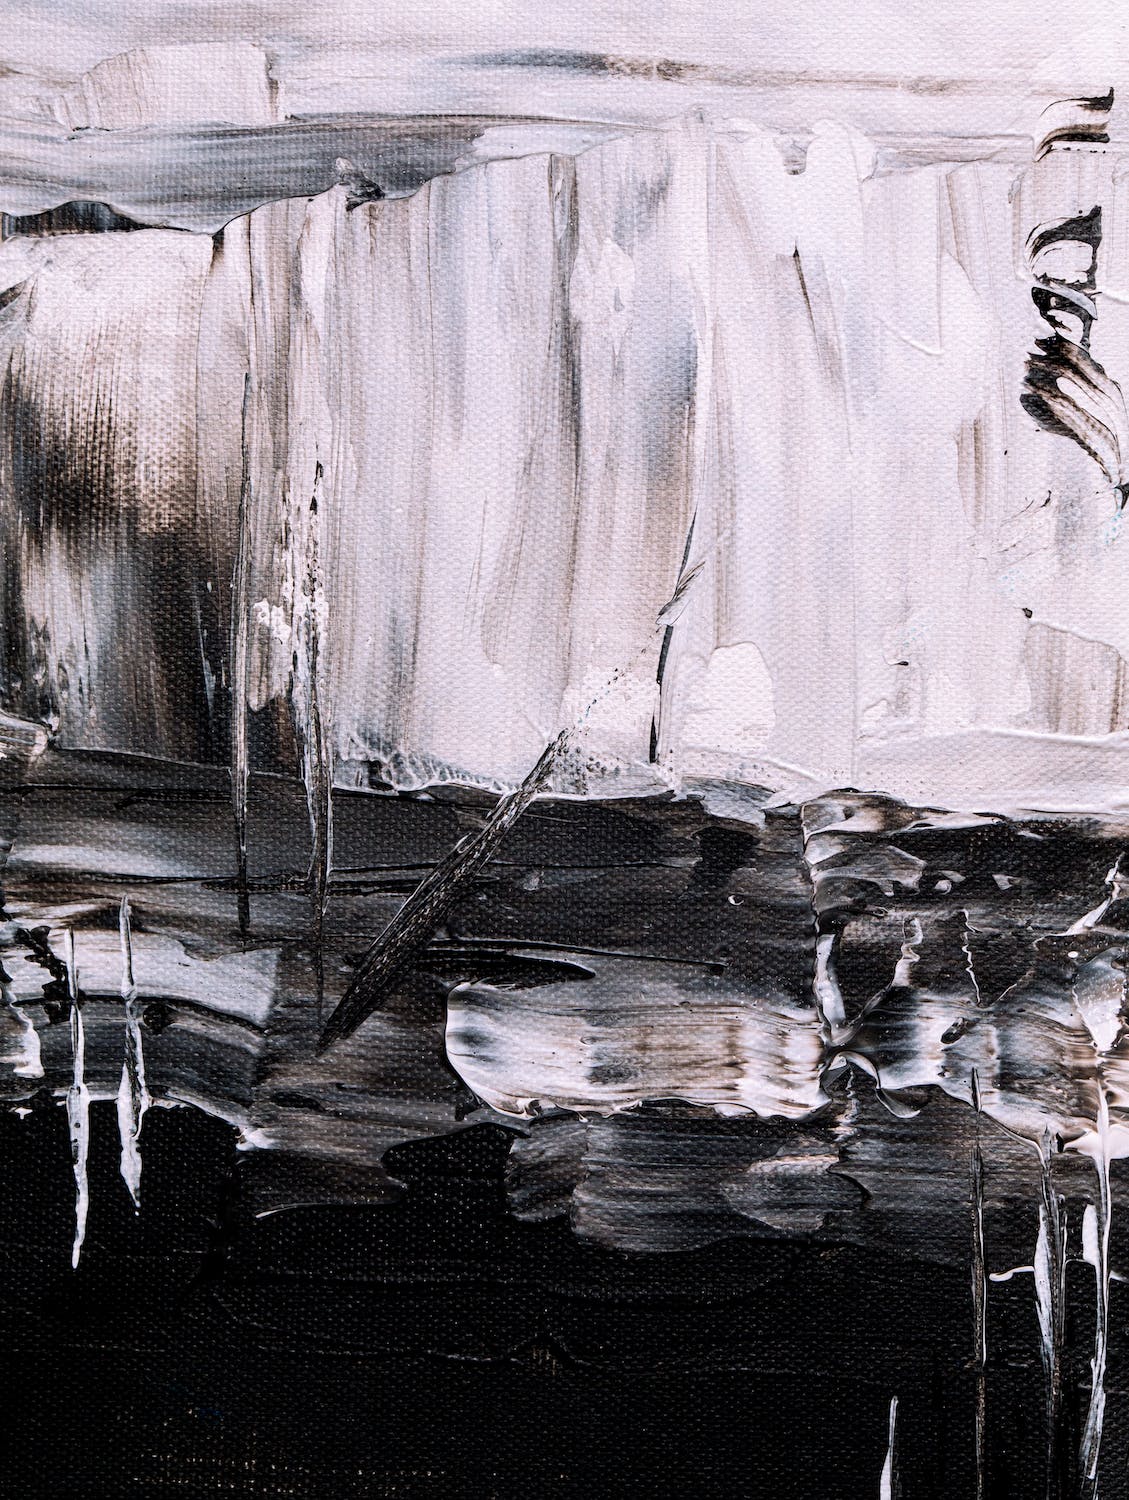 Abstract painting in shades of white and black. White brushstrokes coming down from top. Black brushstrokes across bottom half, starting to mix with white in the middle.